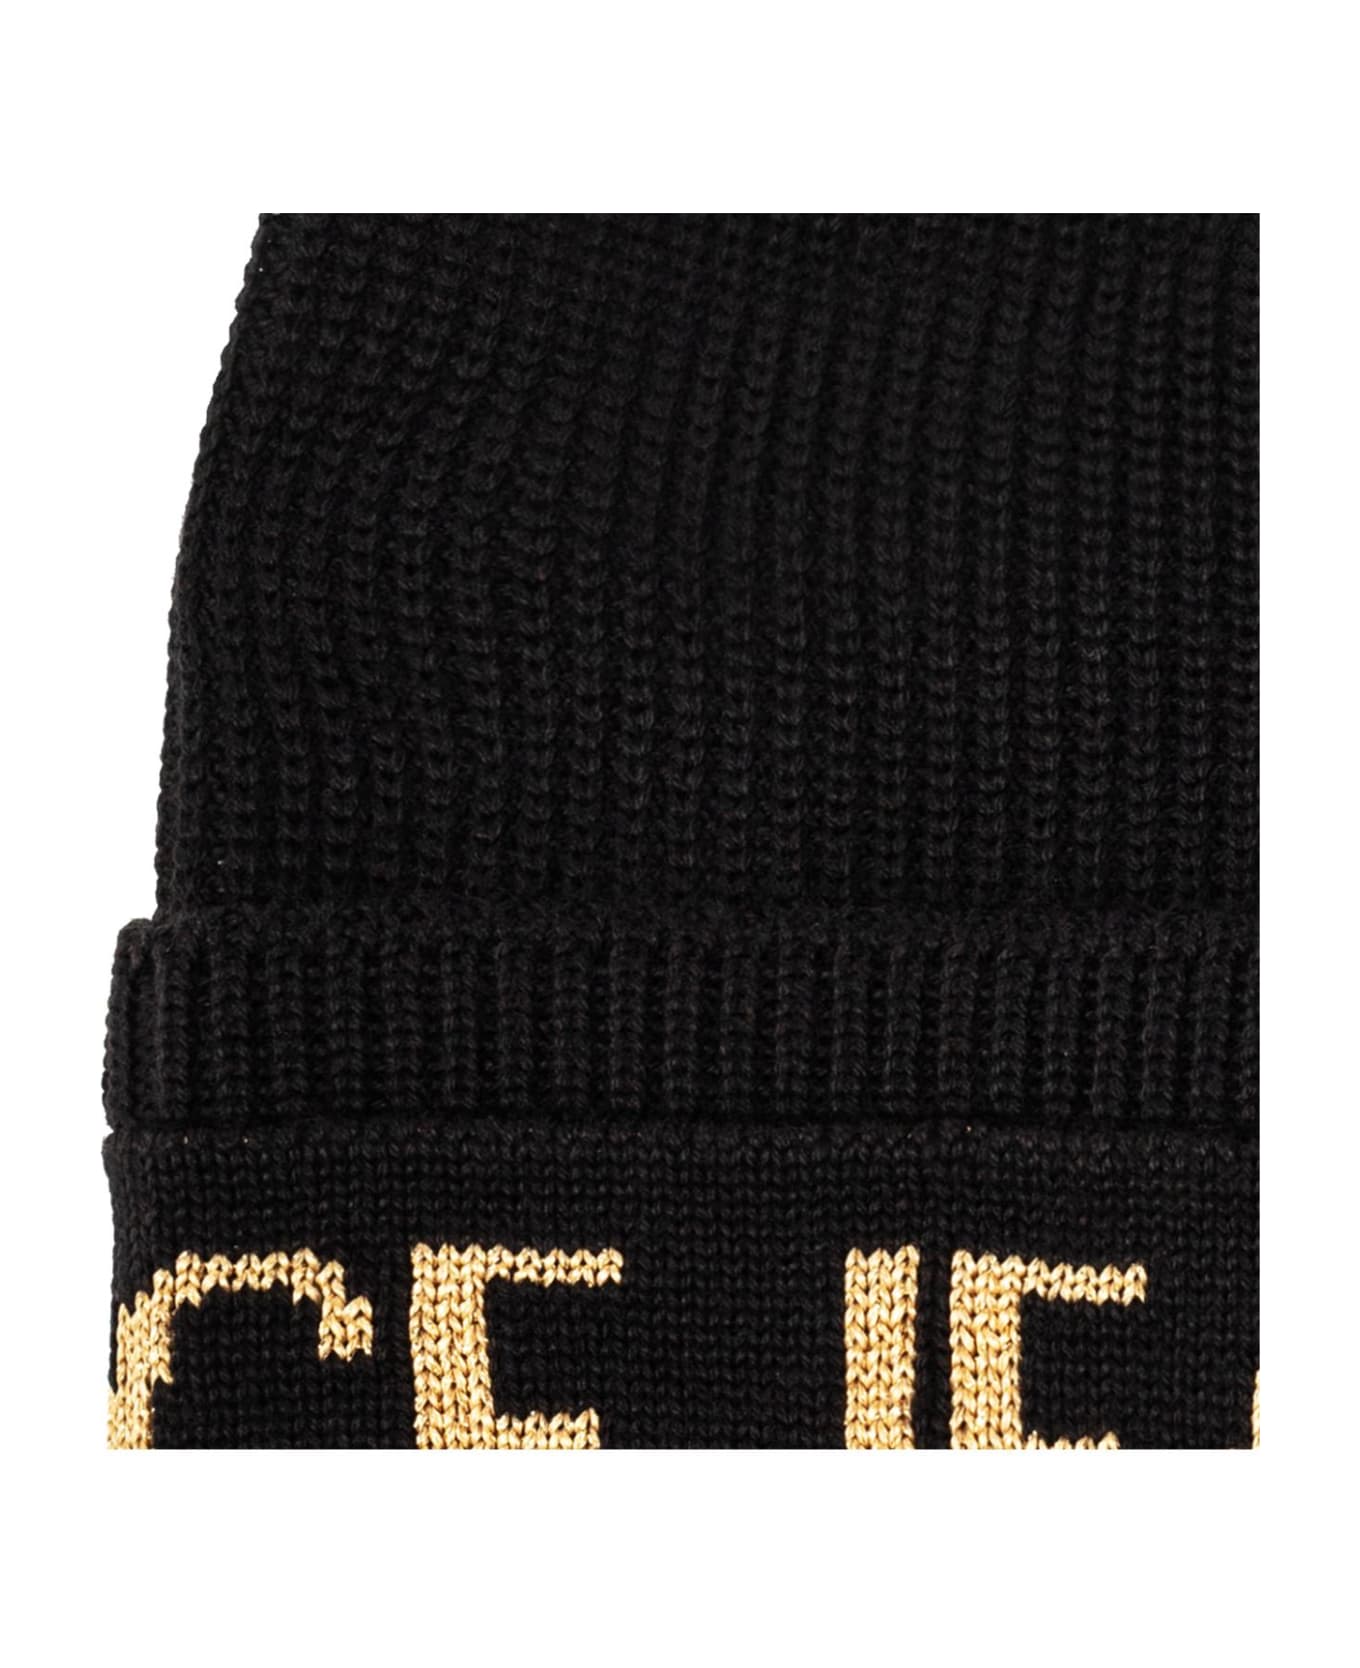 Versace Jeans Couture Hat - BLACK/GOLD